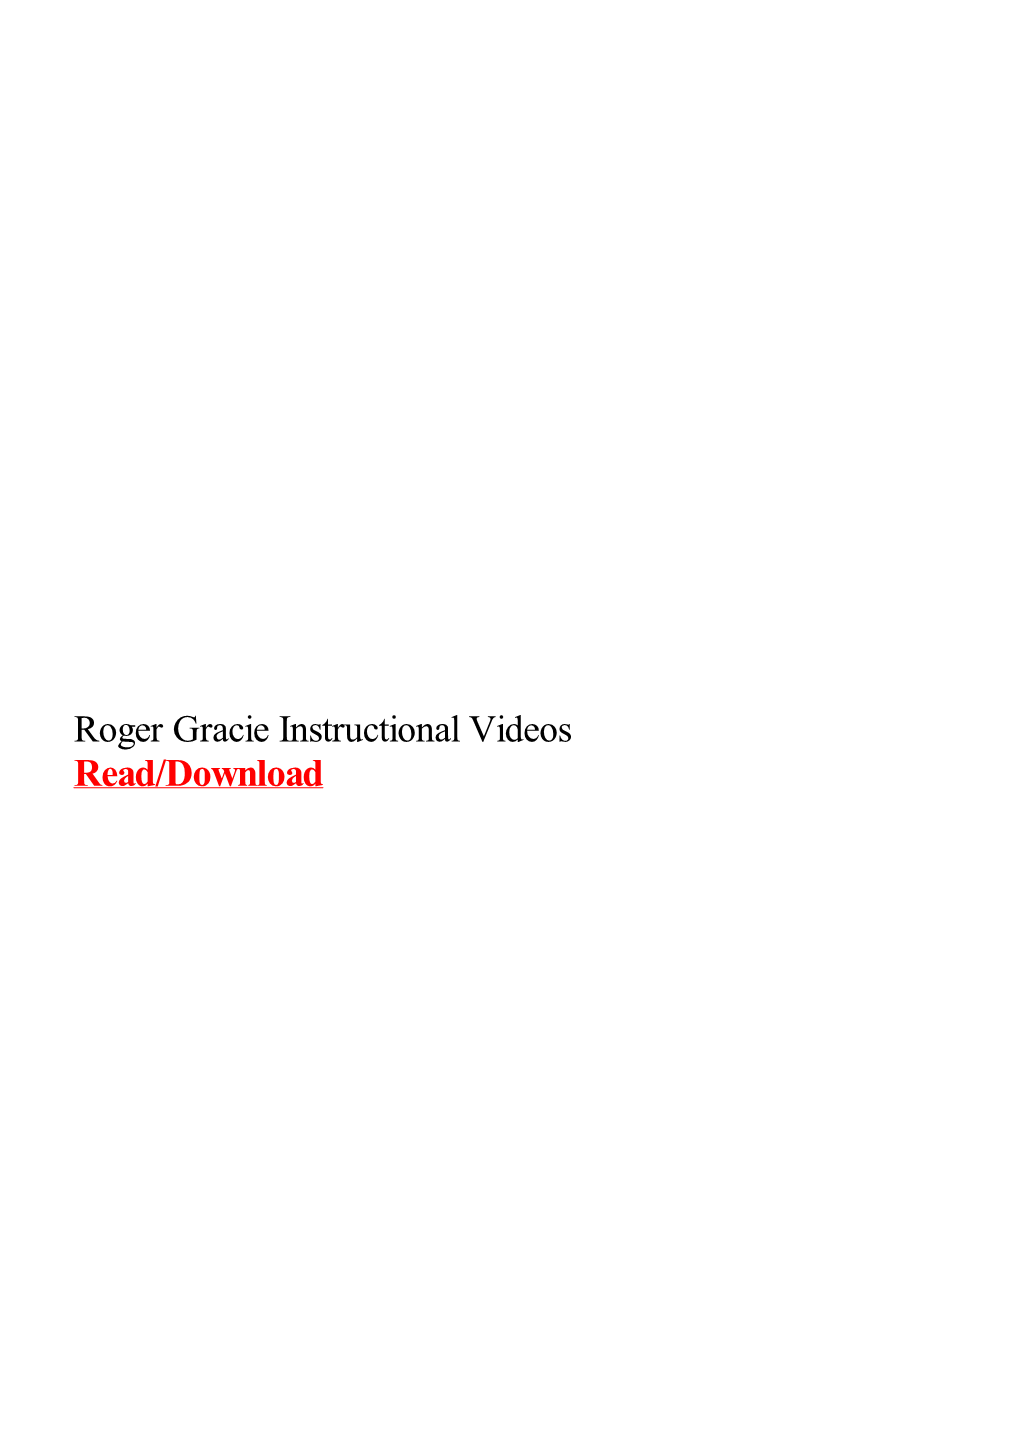 Roger Gracie Instructional Videos